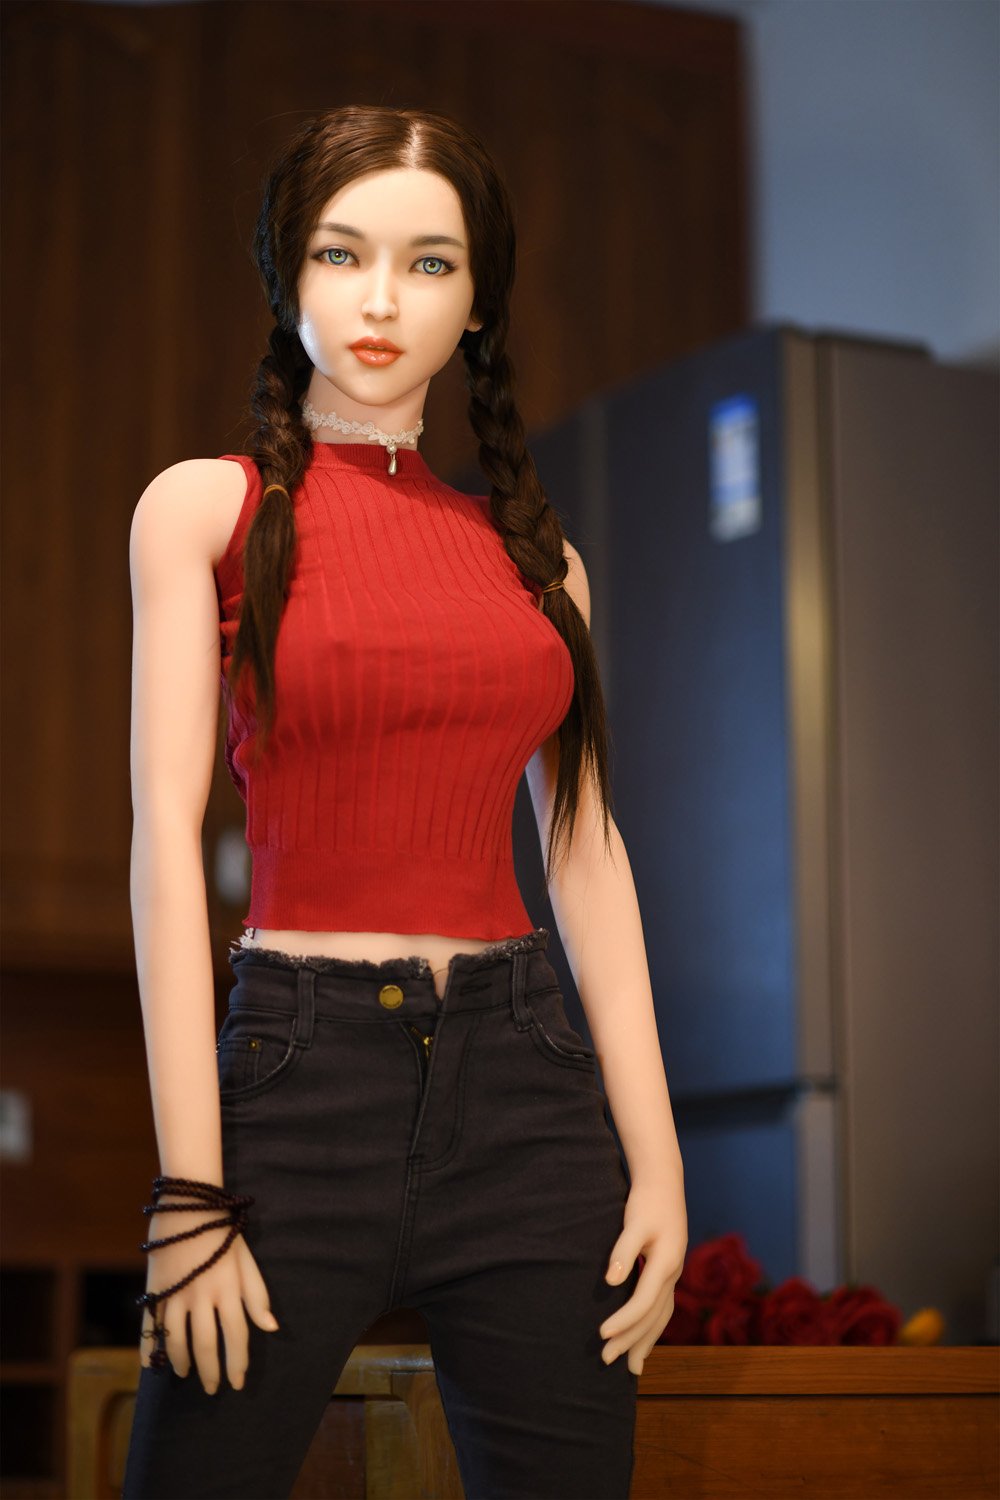 Sawyer-170CM(5.5ft) adult silicone doll for sex-SexDolls Station